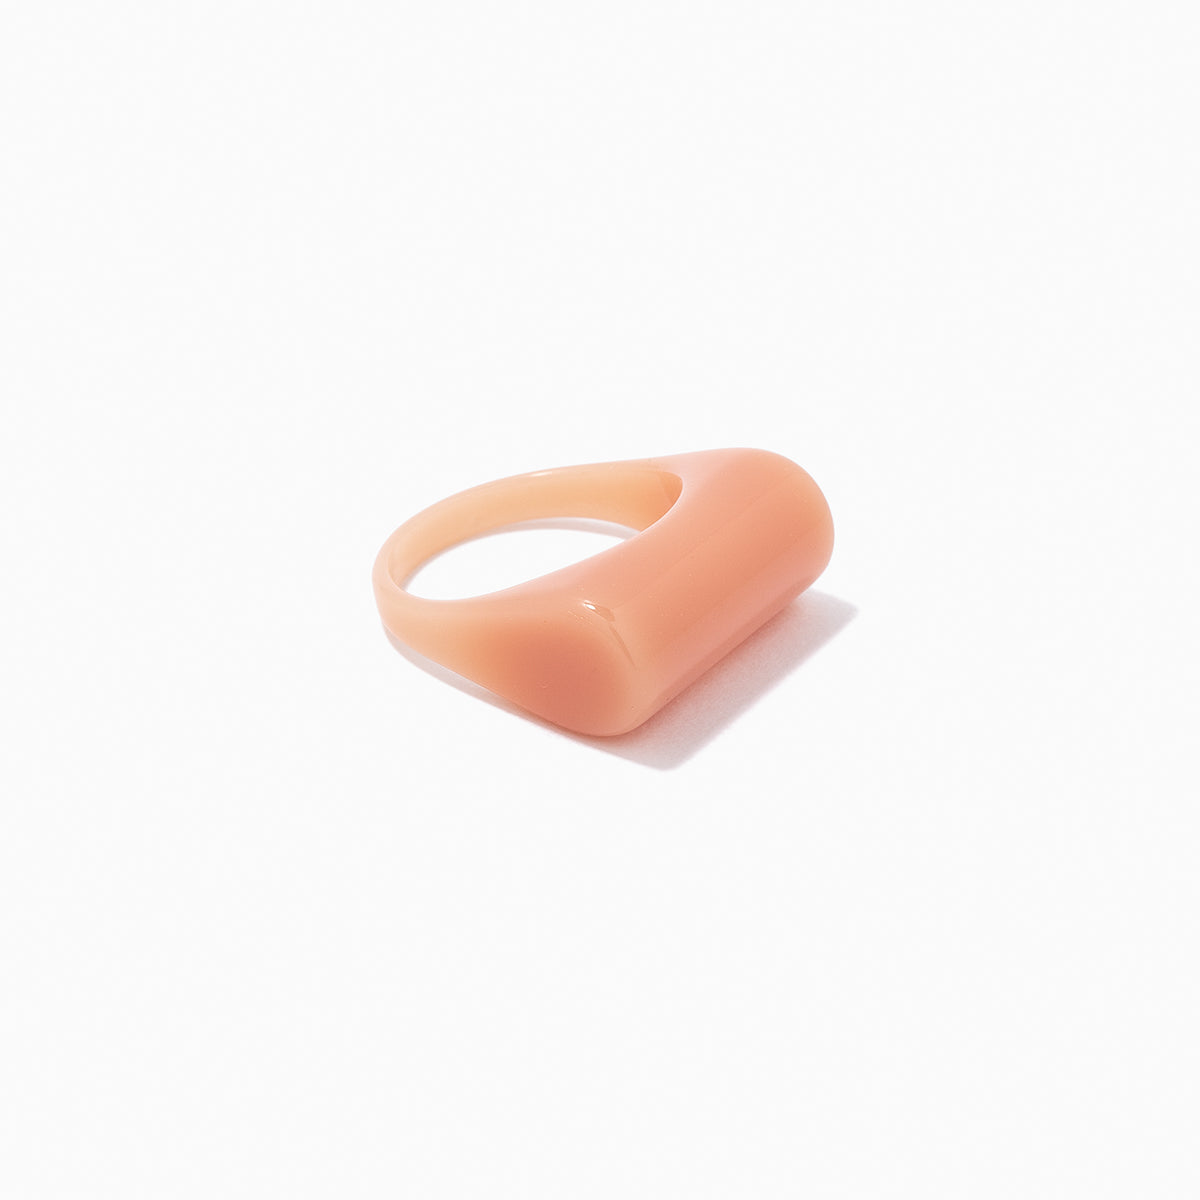 Touch of Pink Ring in Size 6 | Women's Jewelry by Uncommon James